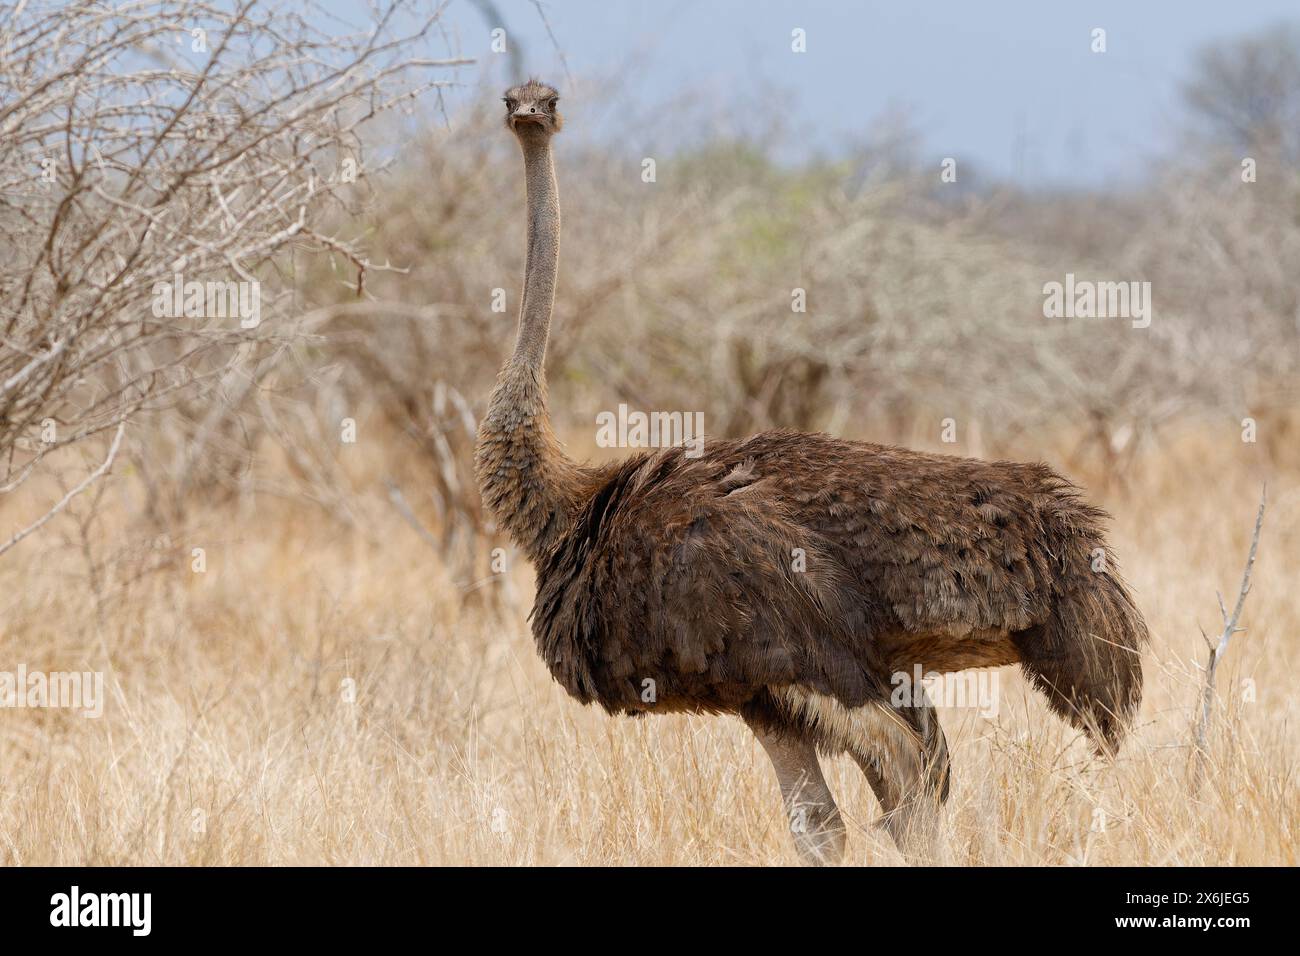 South African ostrich (Struthio camelus australis), adult female standing in dry grassland, eye contact, animal portrait, Kruger NP, South Africa, Stock Photo